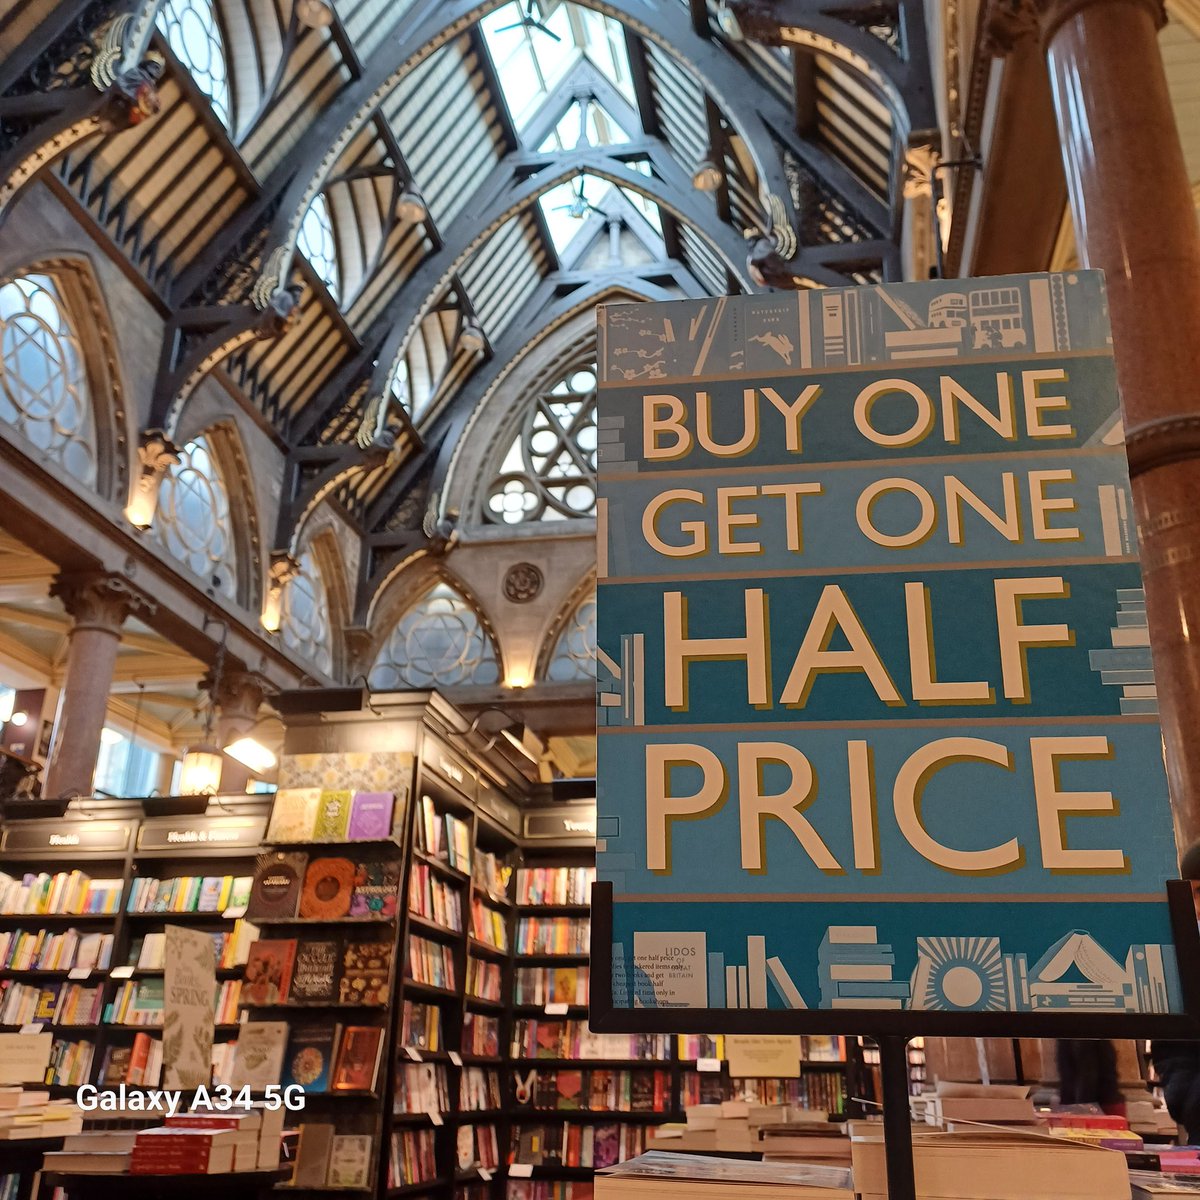 Beautiful Bradford! @WaterstonesBD1 has some signed Harry Heape books! Cautionary note: This bookshop will make your eyes pop out and your wig spin round.